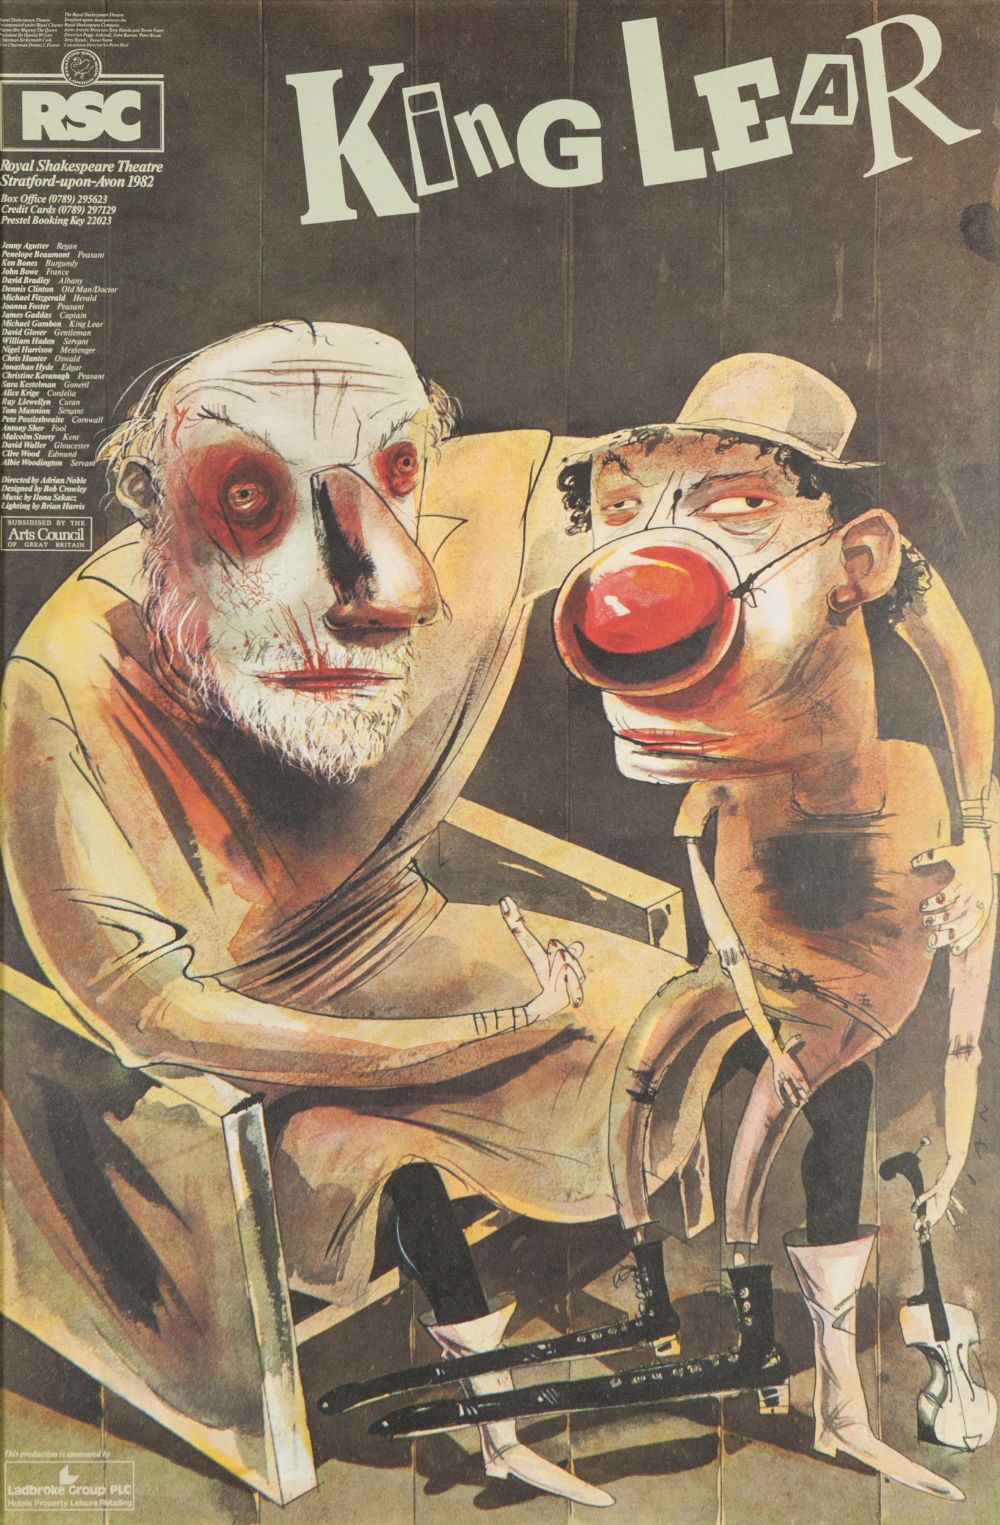 COLLECTION OF FOUR THEATRE POSTERS TO INCLUDE RSC King Lear 1982; Arroyo Klasen Velickovic 1982;